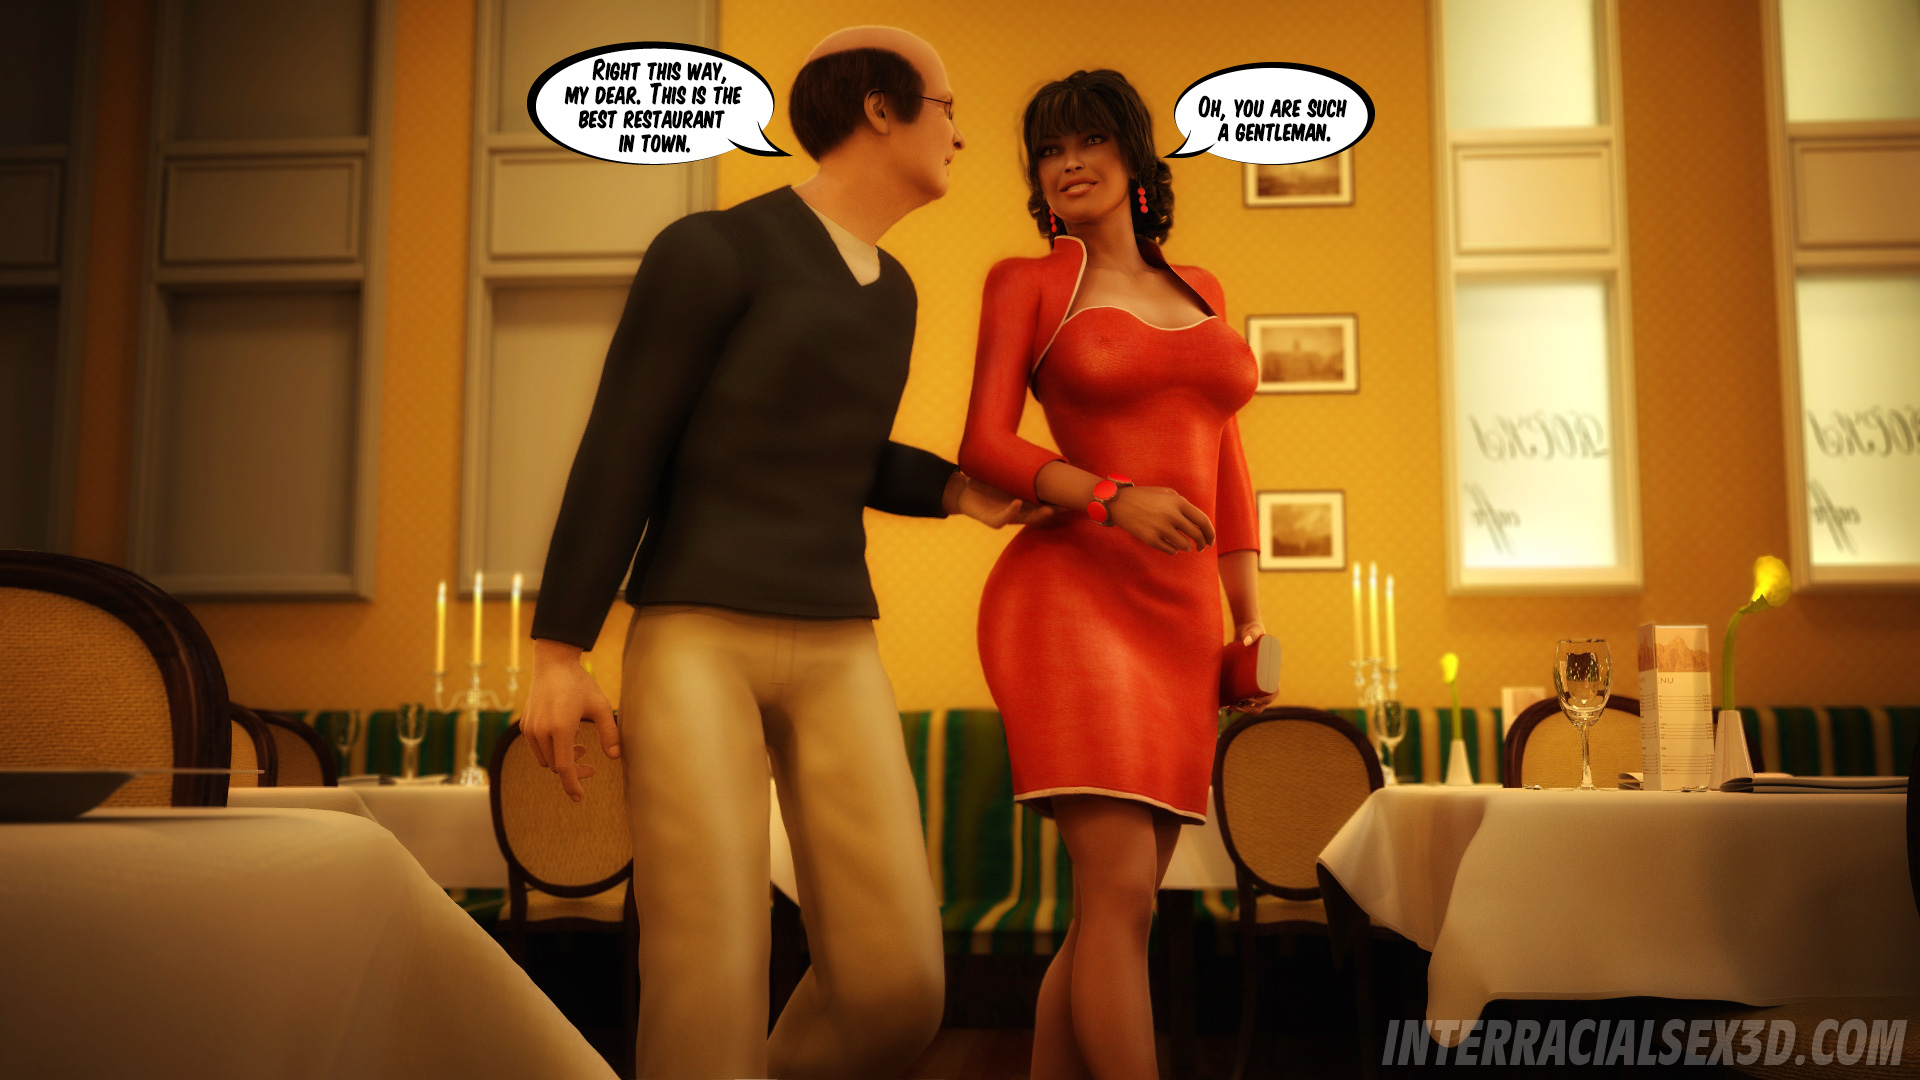 Wedding Anniversary and Cheating Wife Interracialsex3D - Wedding Anniversary and Cheating Wife